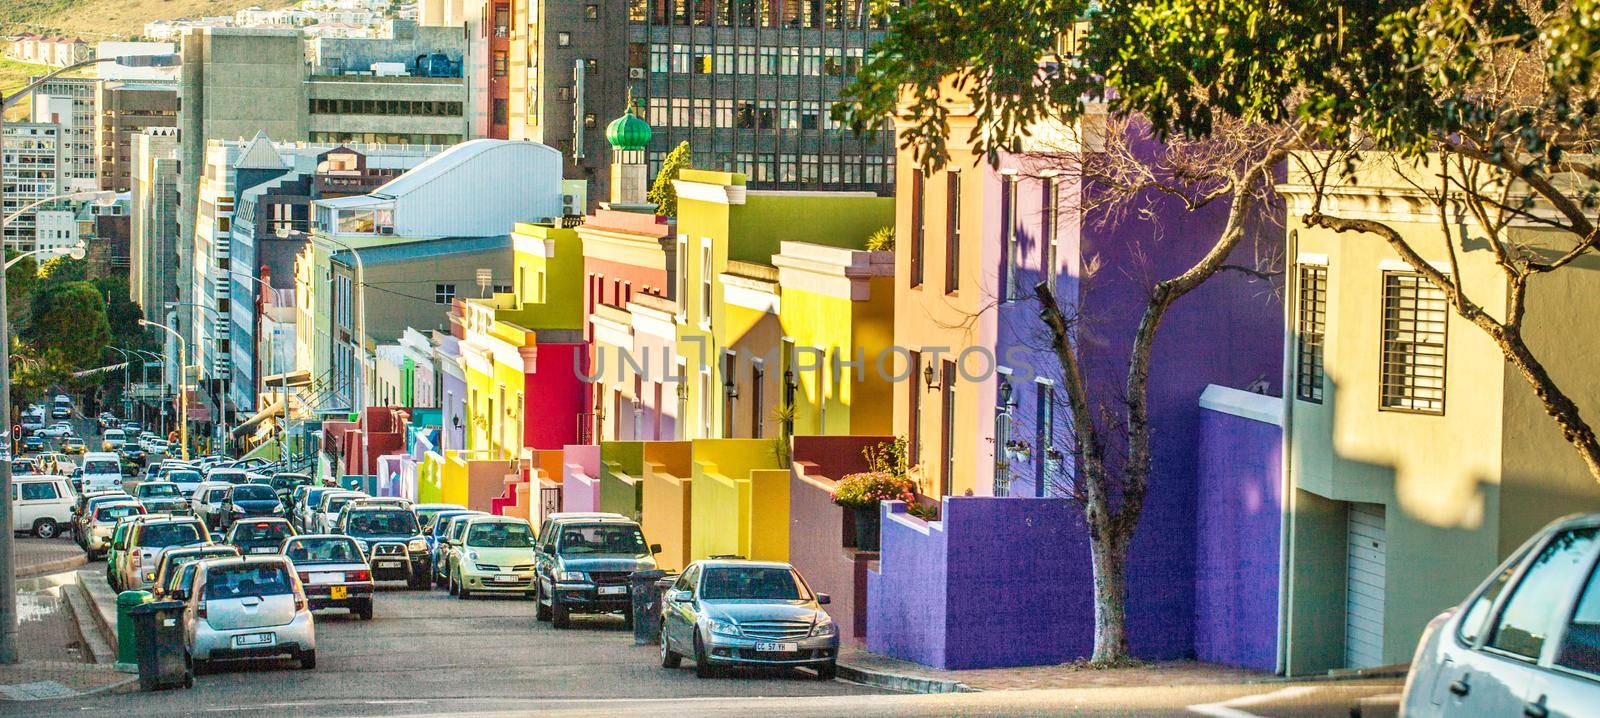 This citys characterful district. Shot of the colorful homes of the Bo Kaap, Cape Town. by YuriArcurs